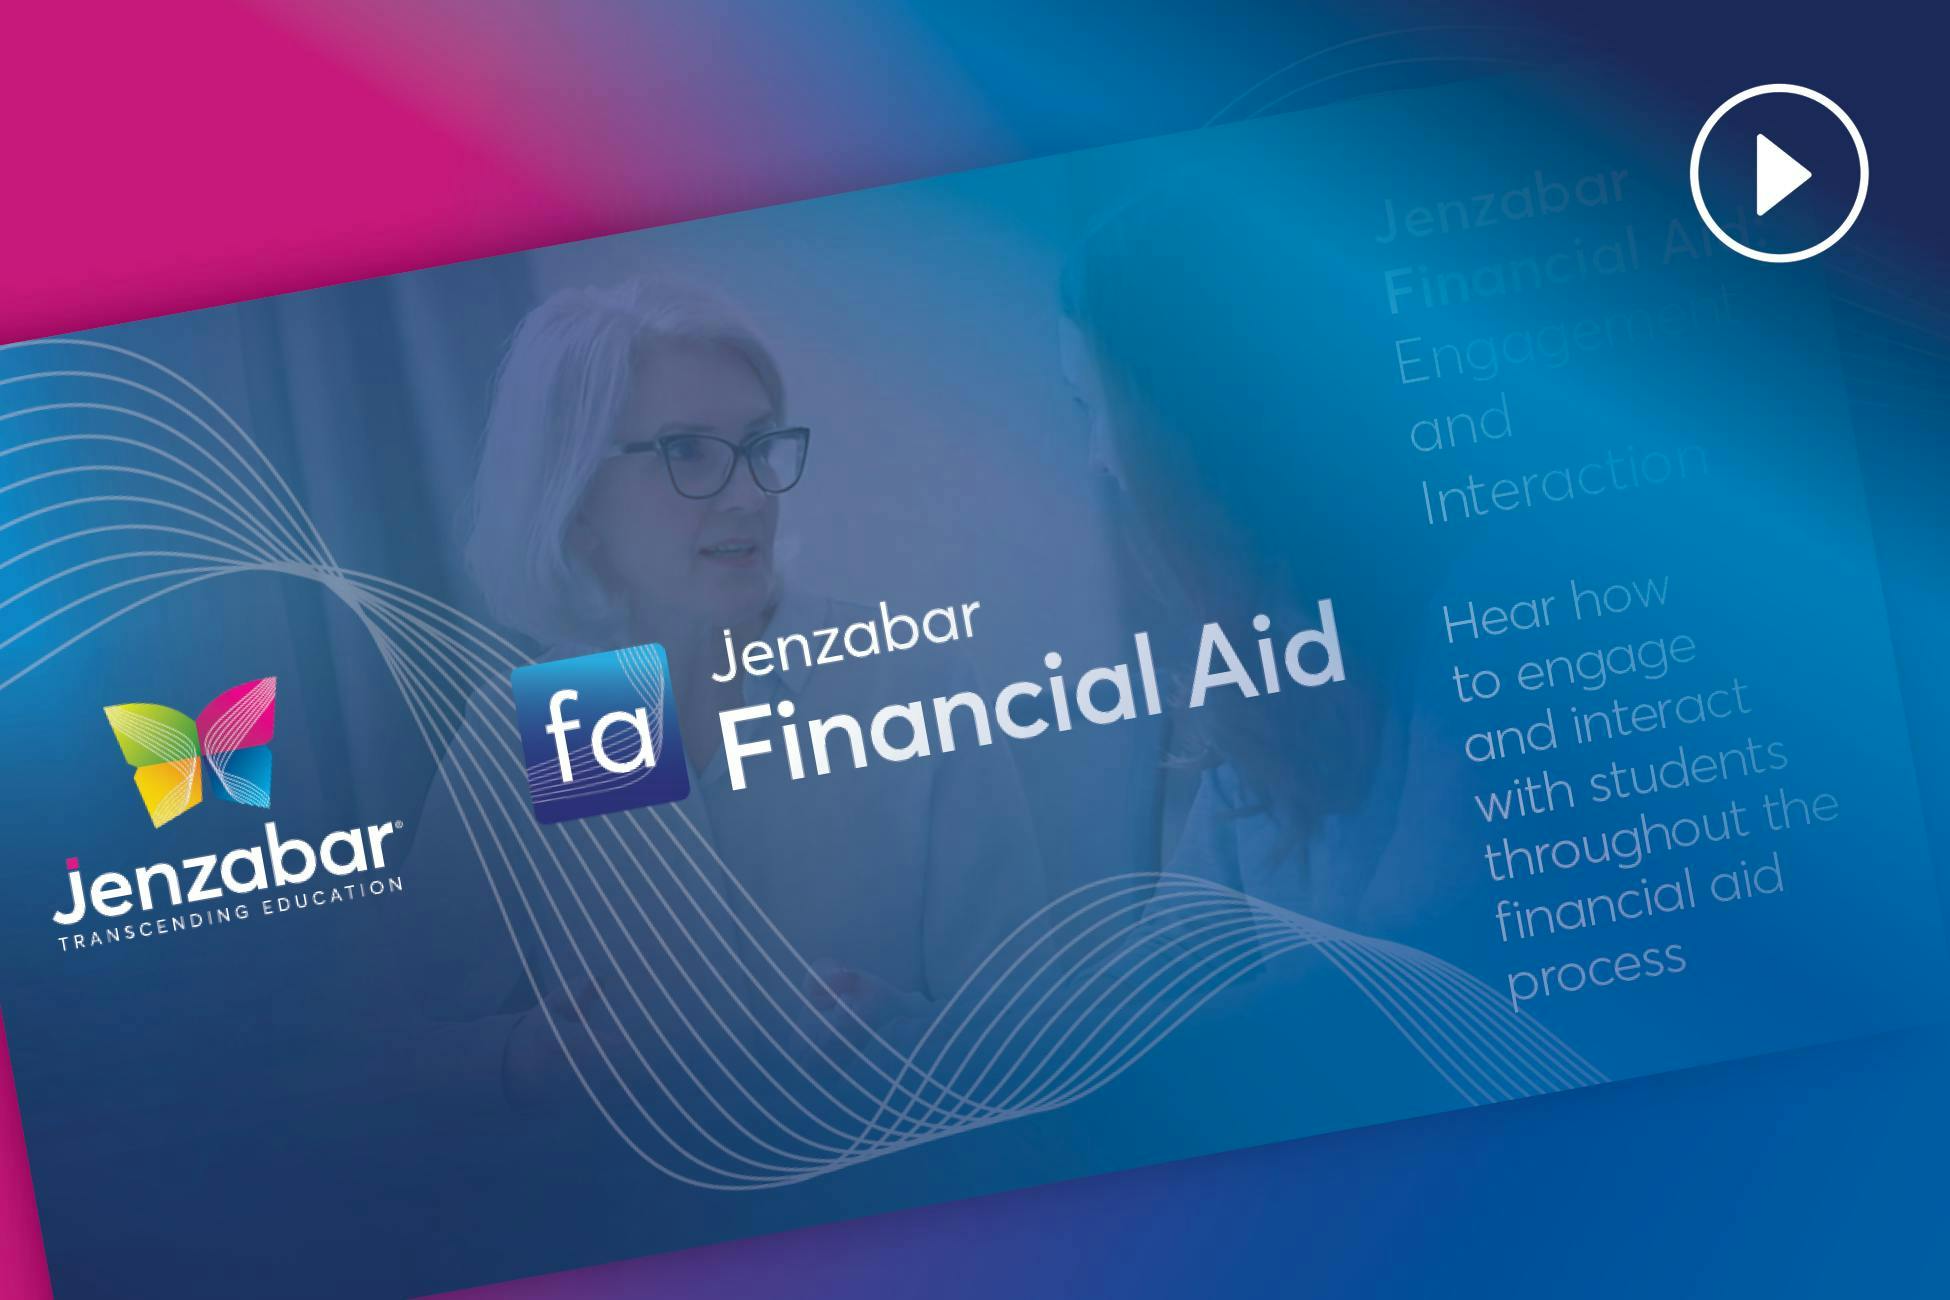 Video: Jenzabar Financial Aid: Engagement and Interaction